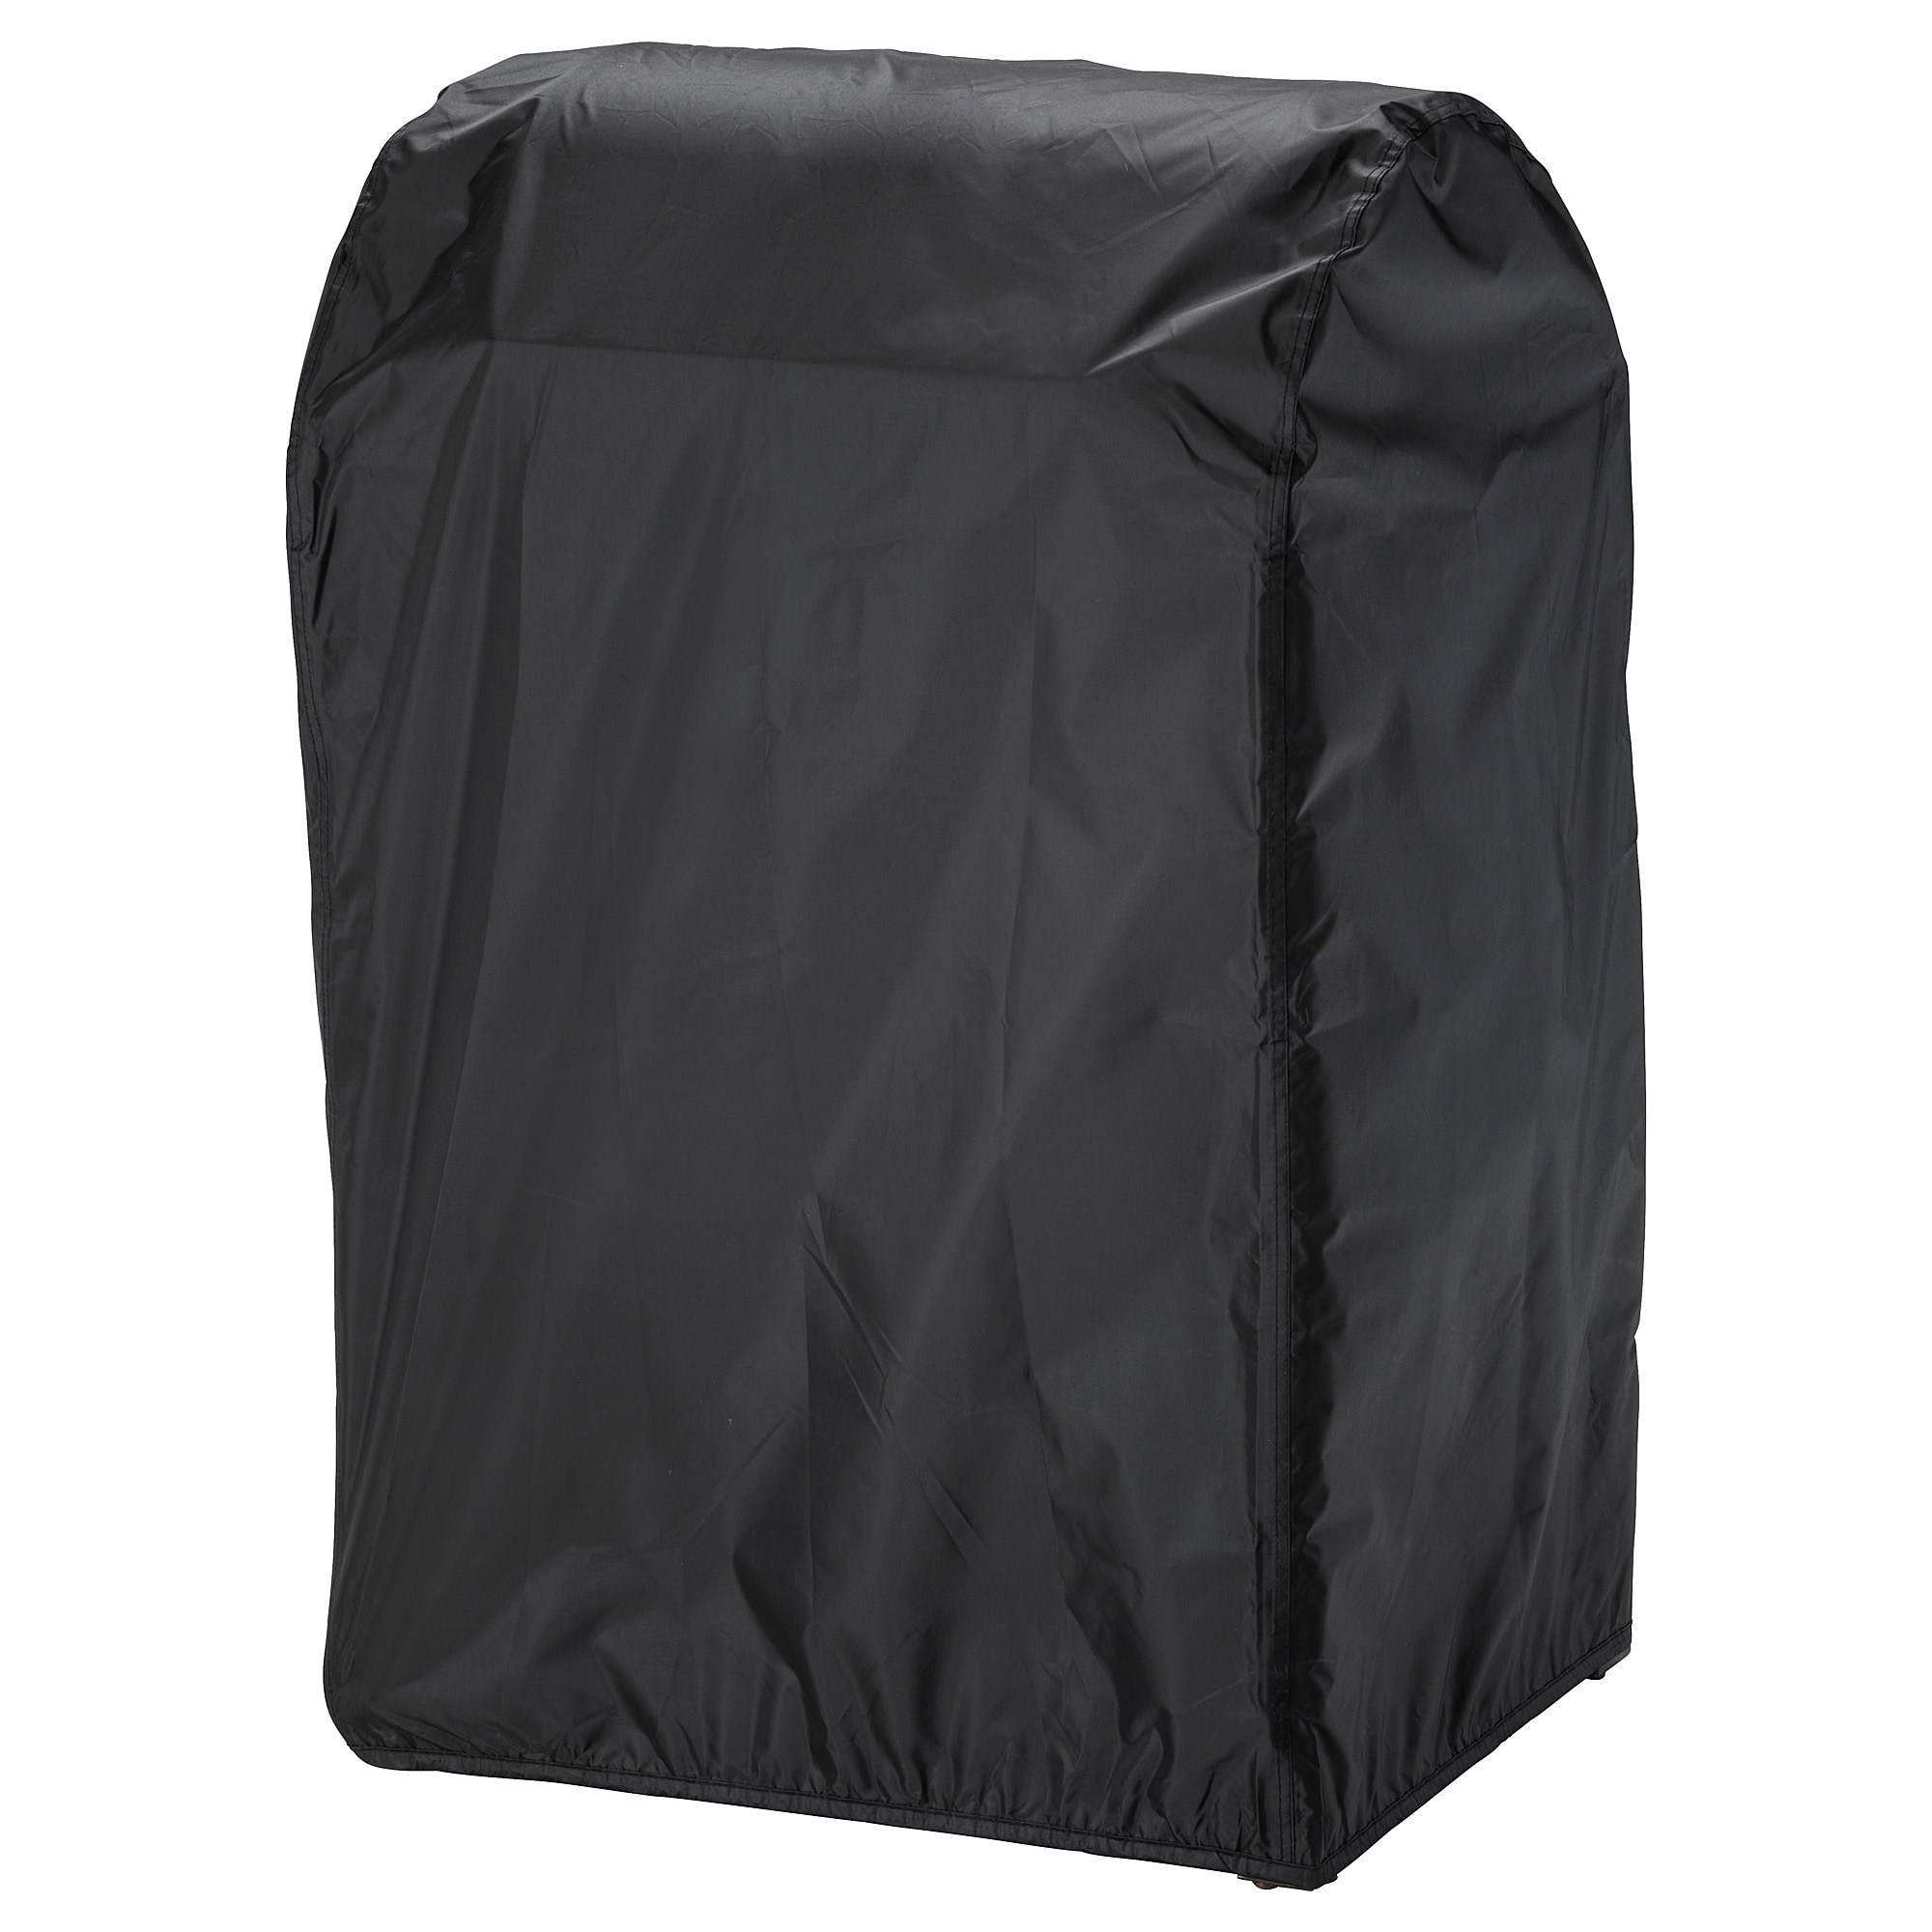 TOSTERO cover for grill Black Outdoor textiles Furniture factories, suppliers, manufacturers